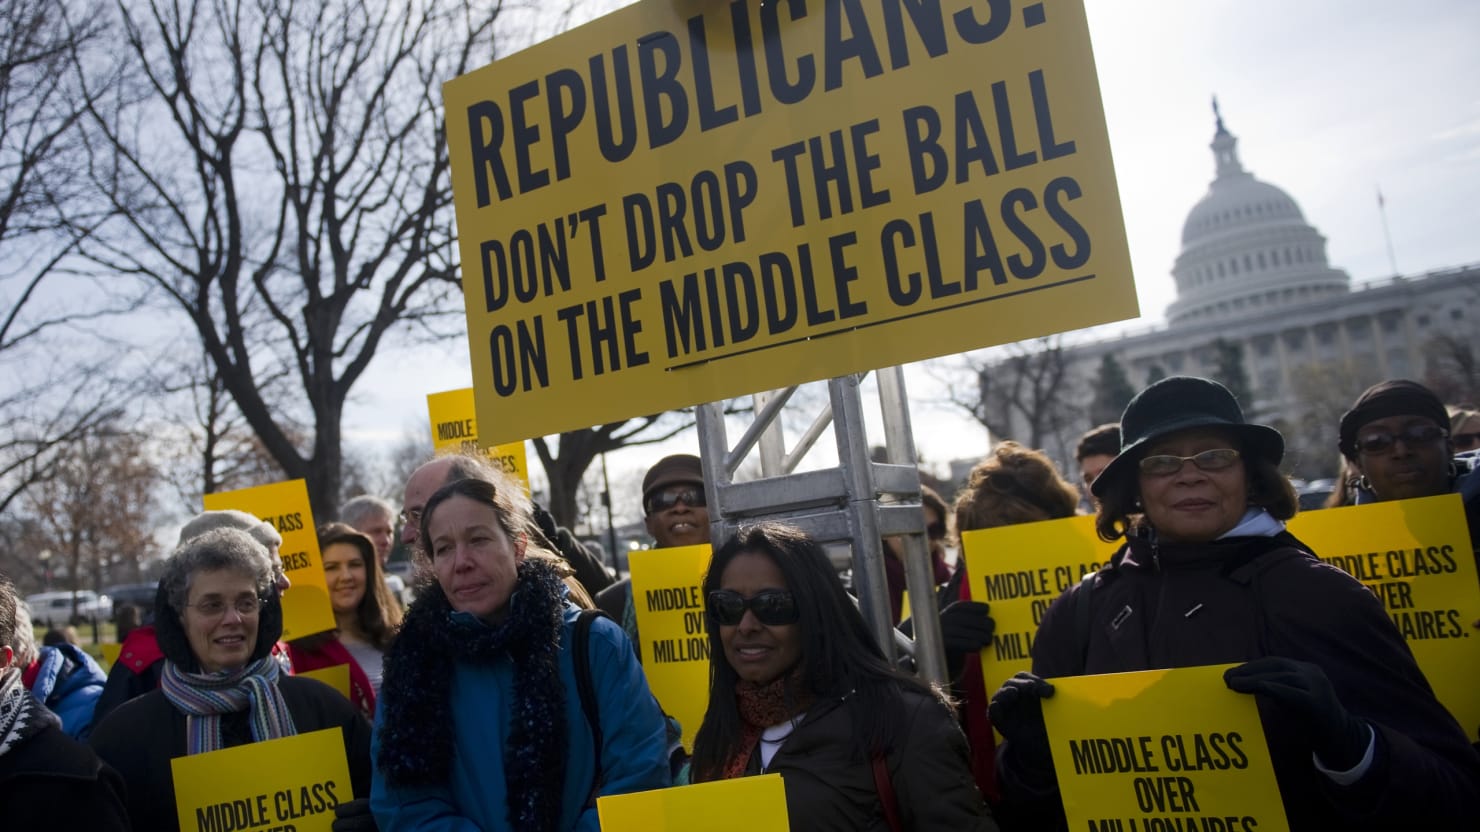 More Republican Crumbs for the Middle Class